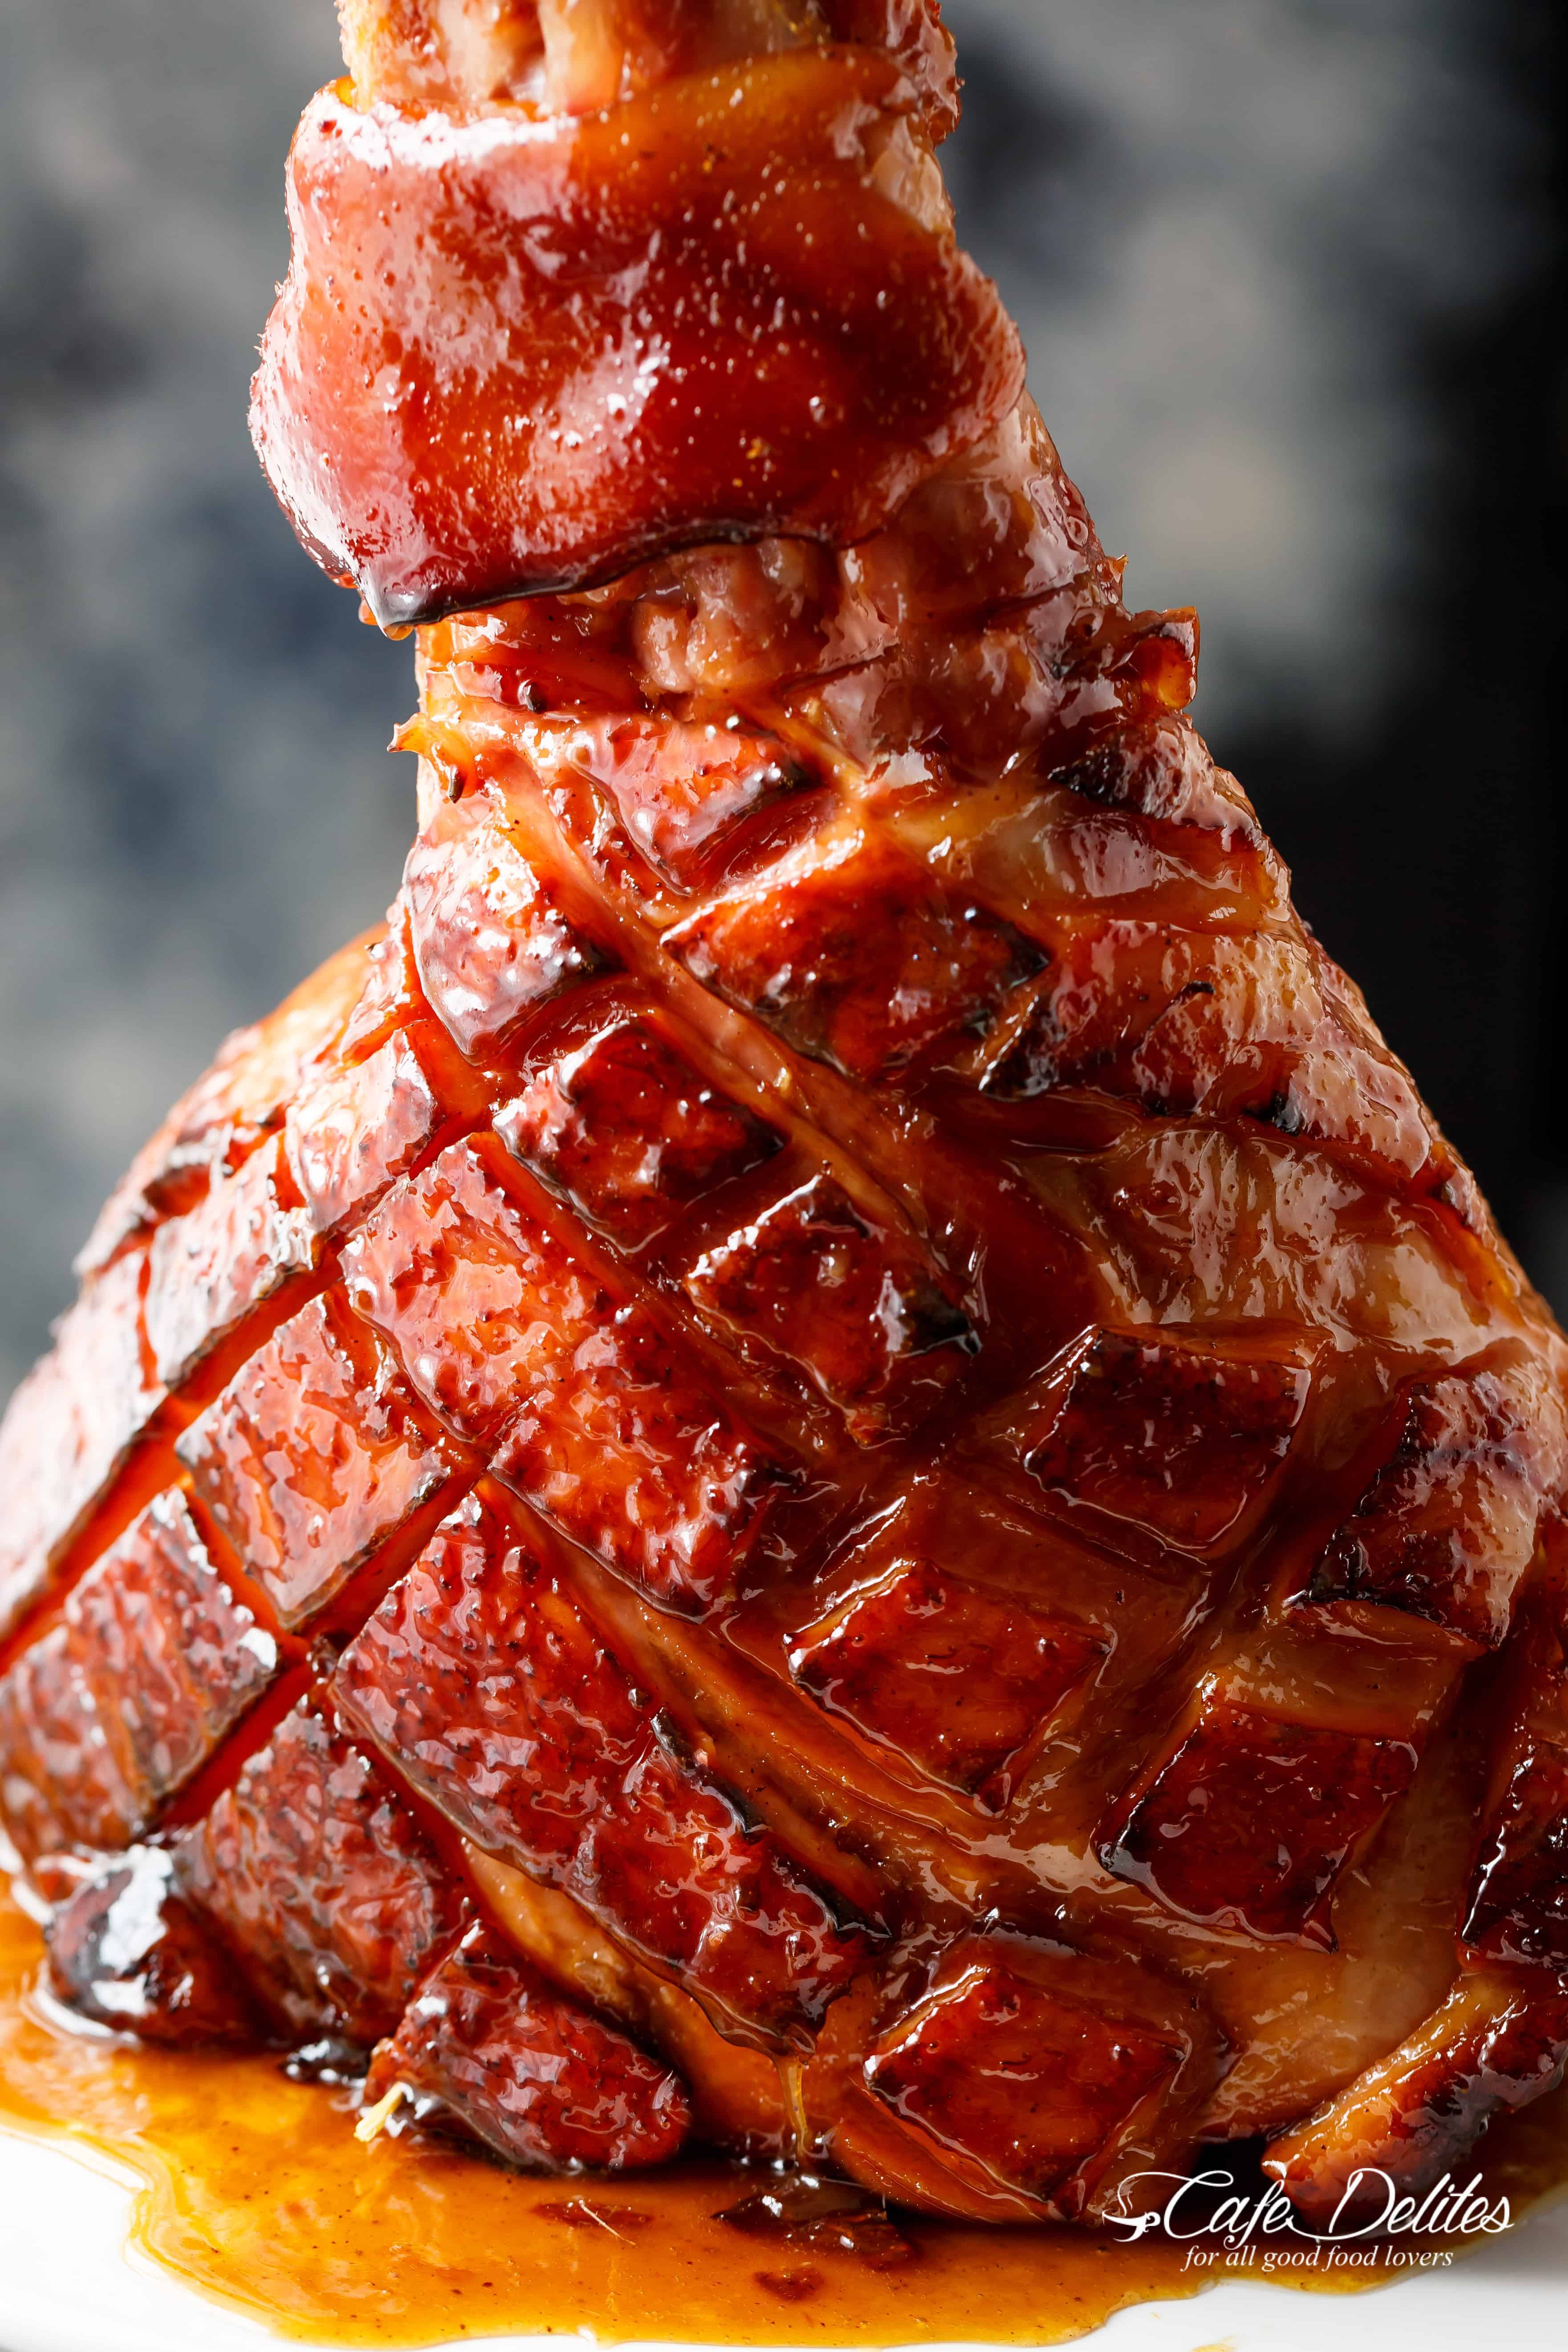 Brown Sugar Mustard Glazed Ham is the perfect juicy centrepiece for your Christmas dinner table! You will love this GLAZE! | cafedelites.com